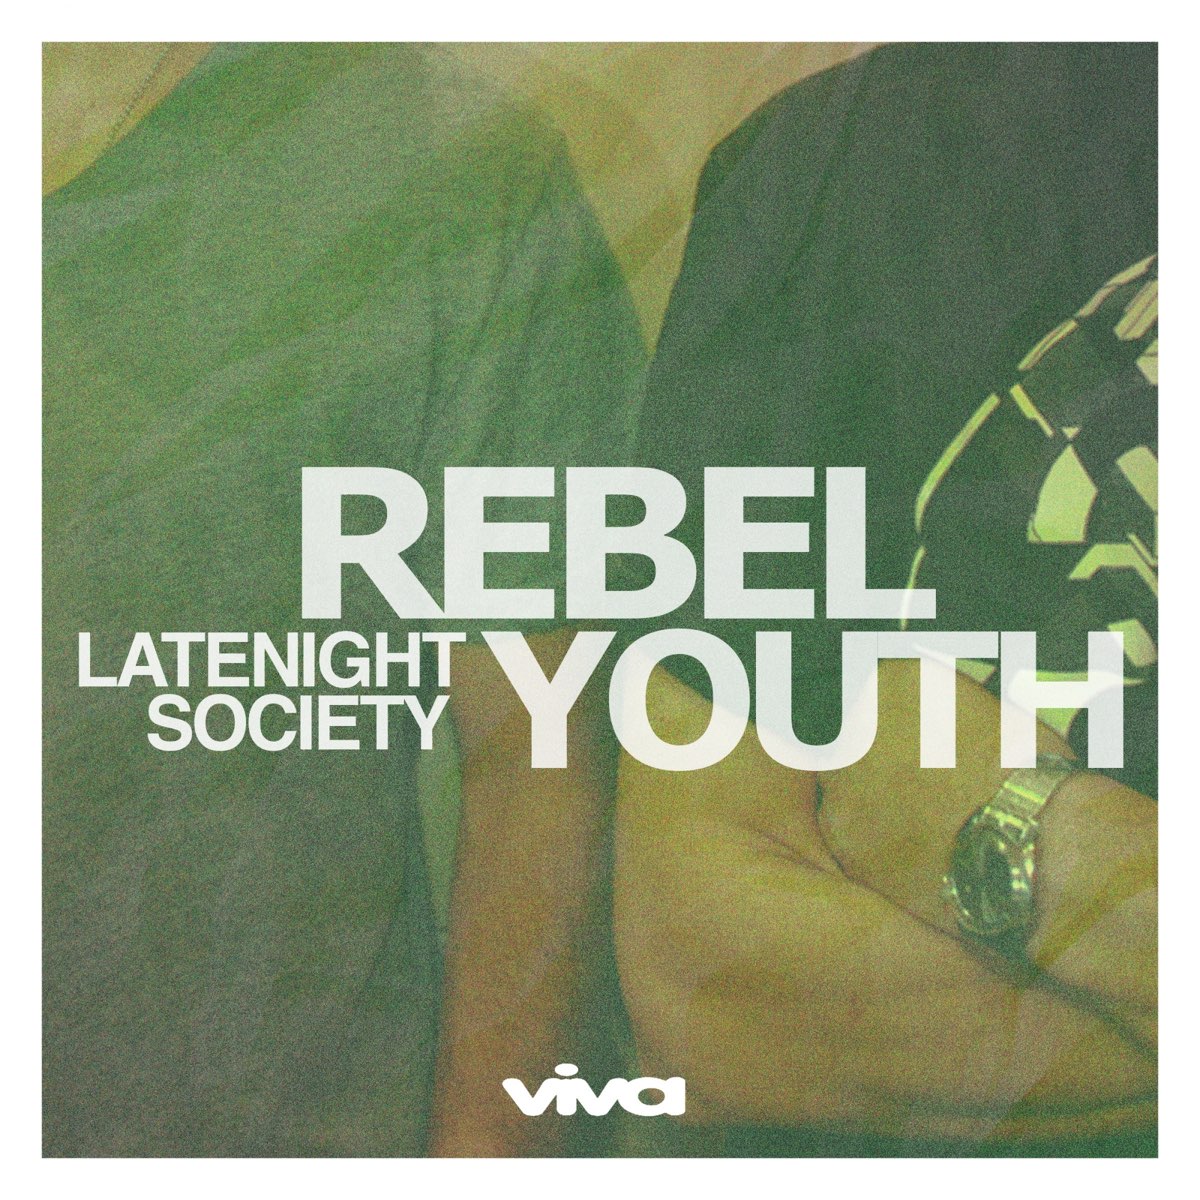 Society now. Rebel Youth Sphera. The Rebel Youth Exclusive registered перевод.